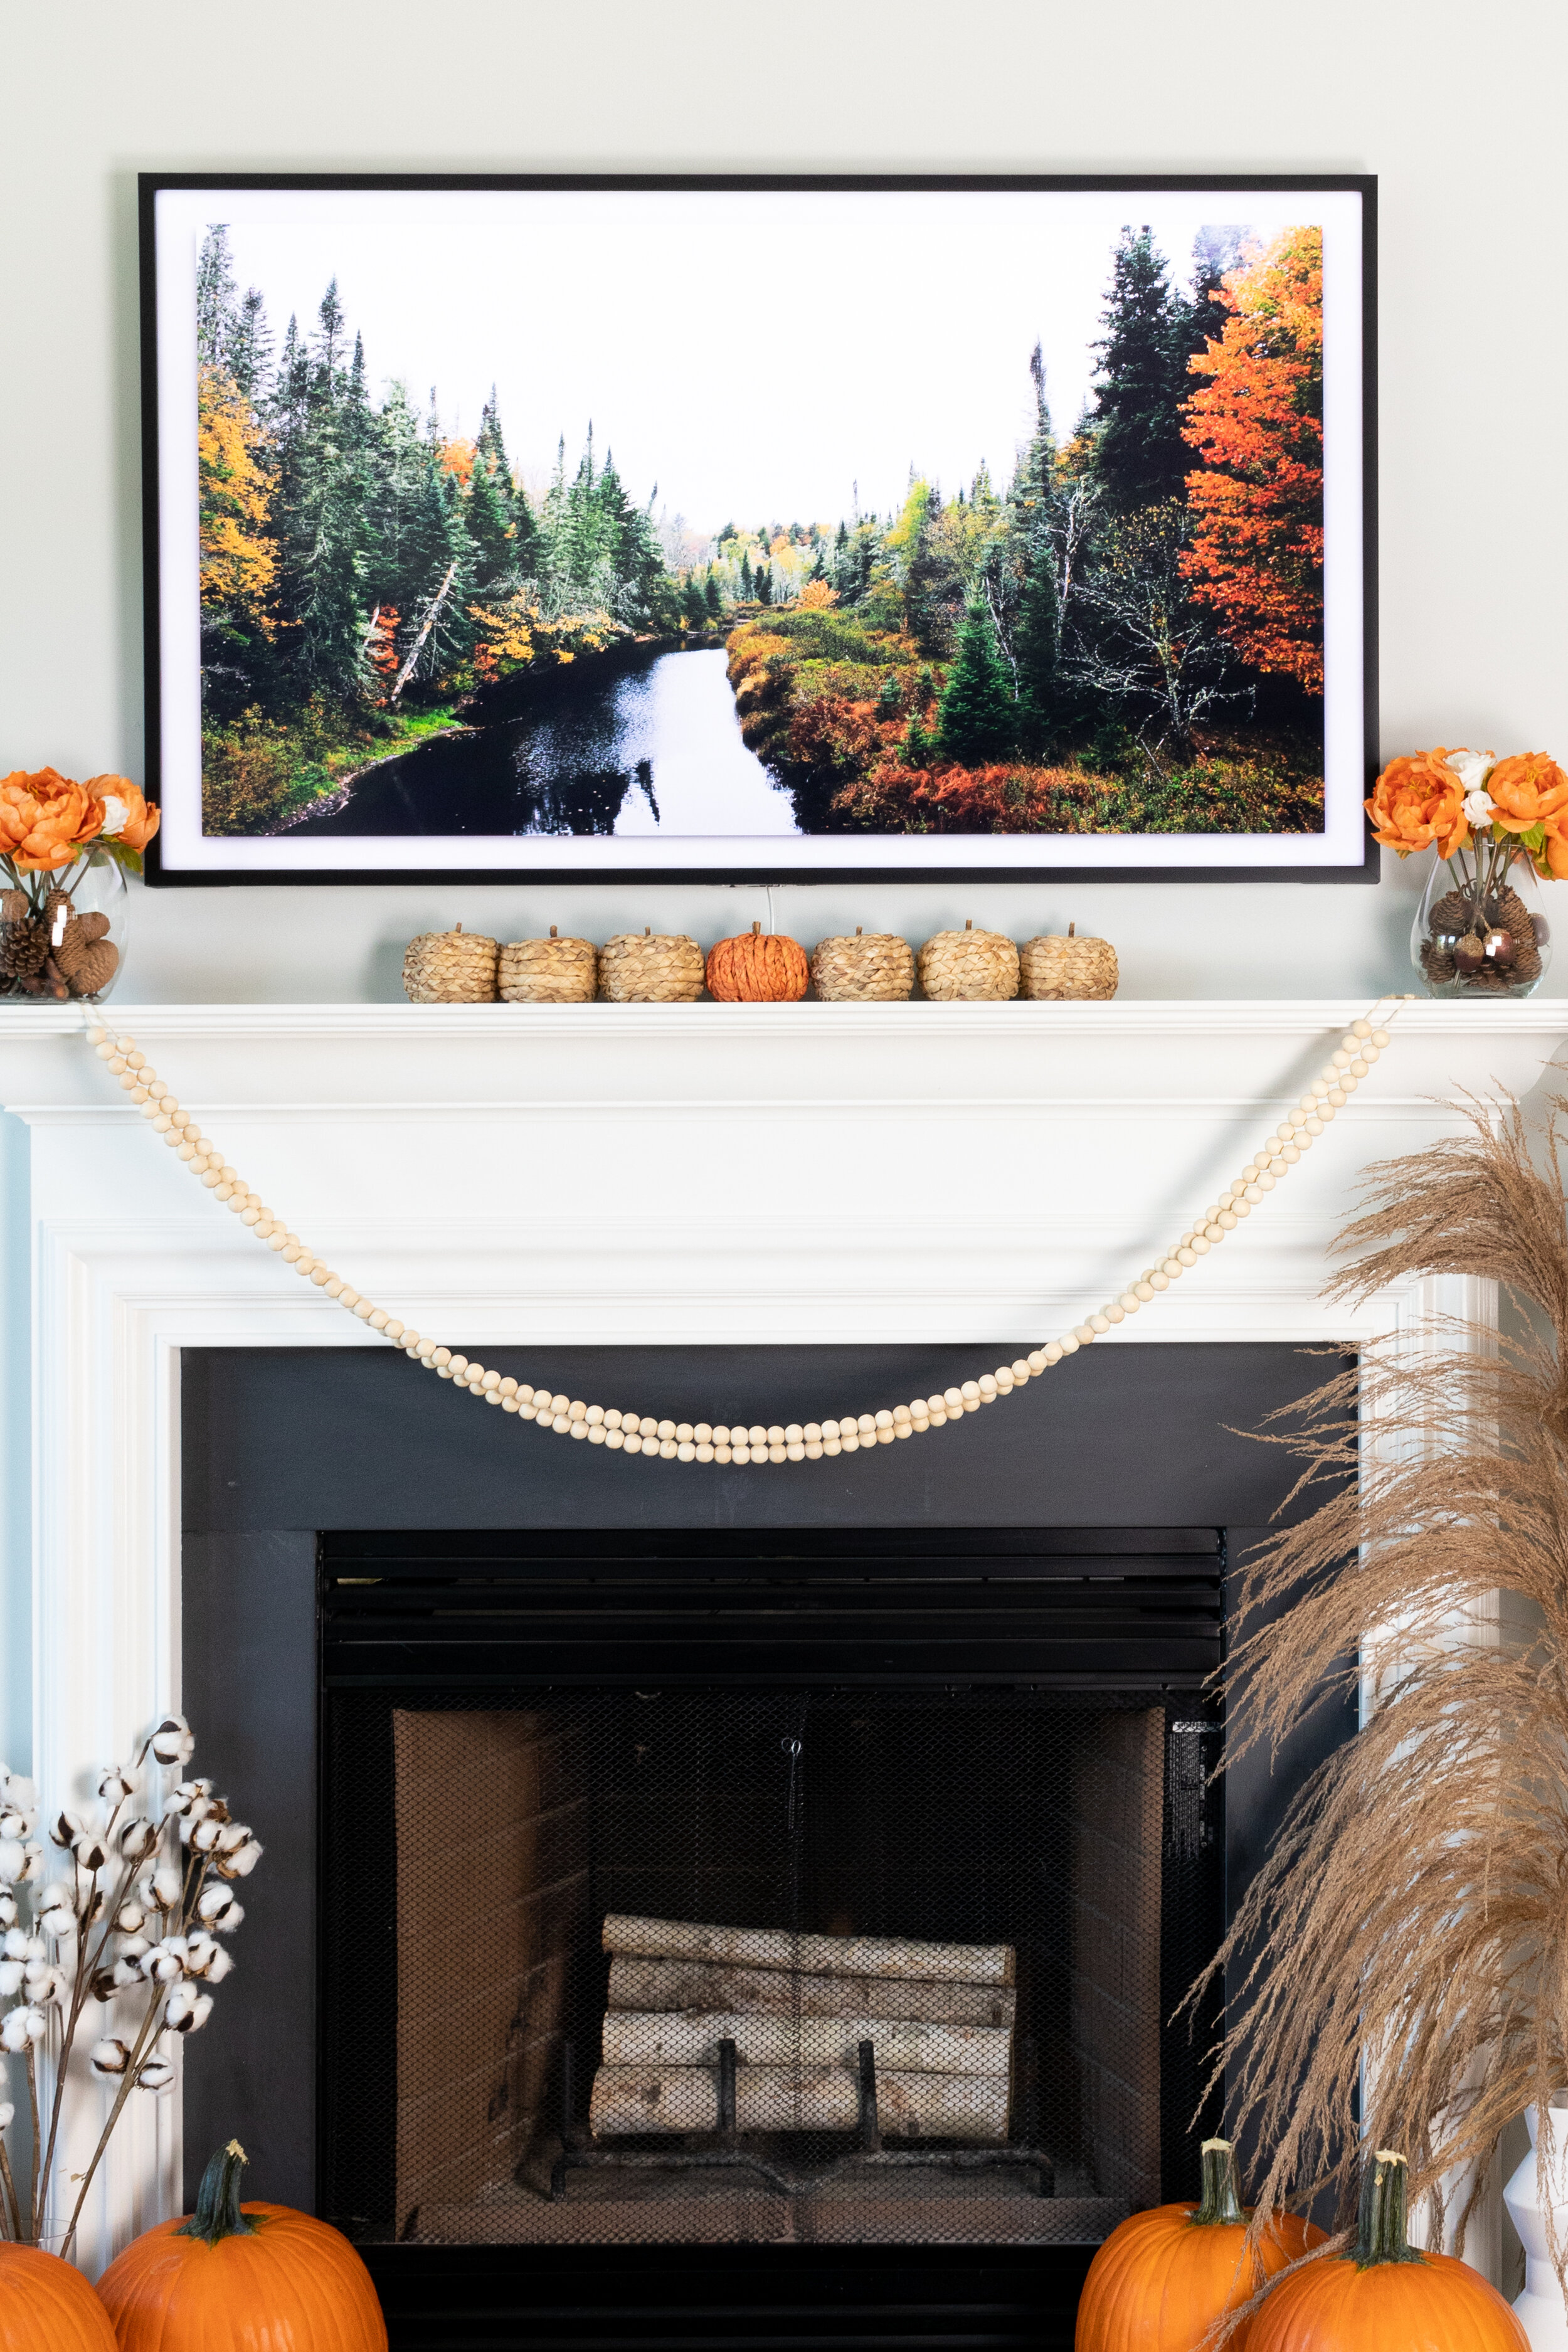 How to decorate tv above fireplace mantel heart fall autumn décor 